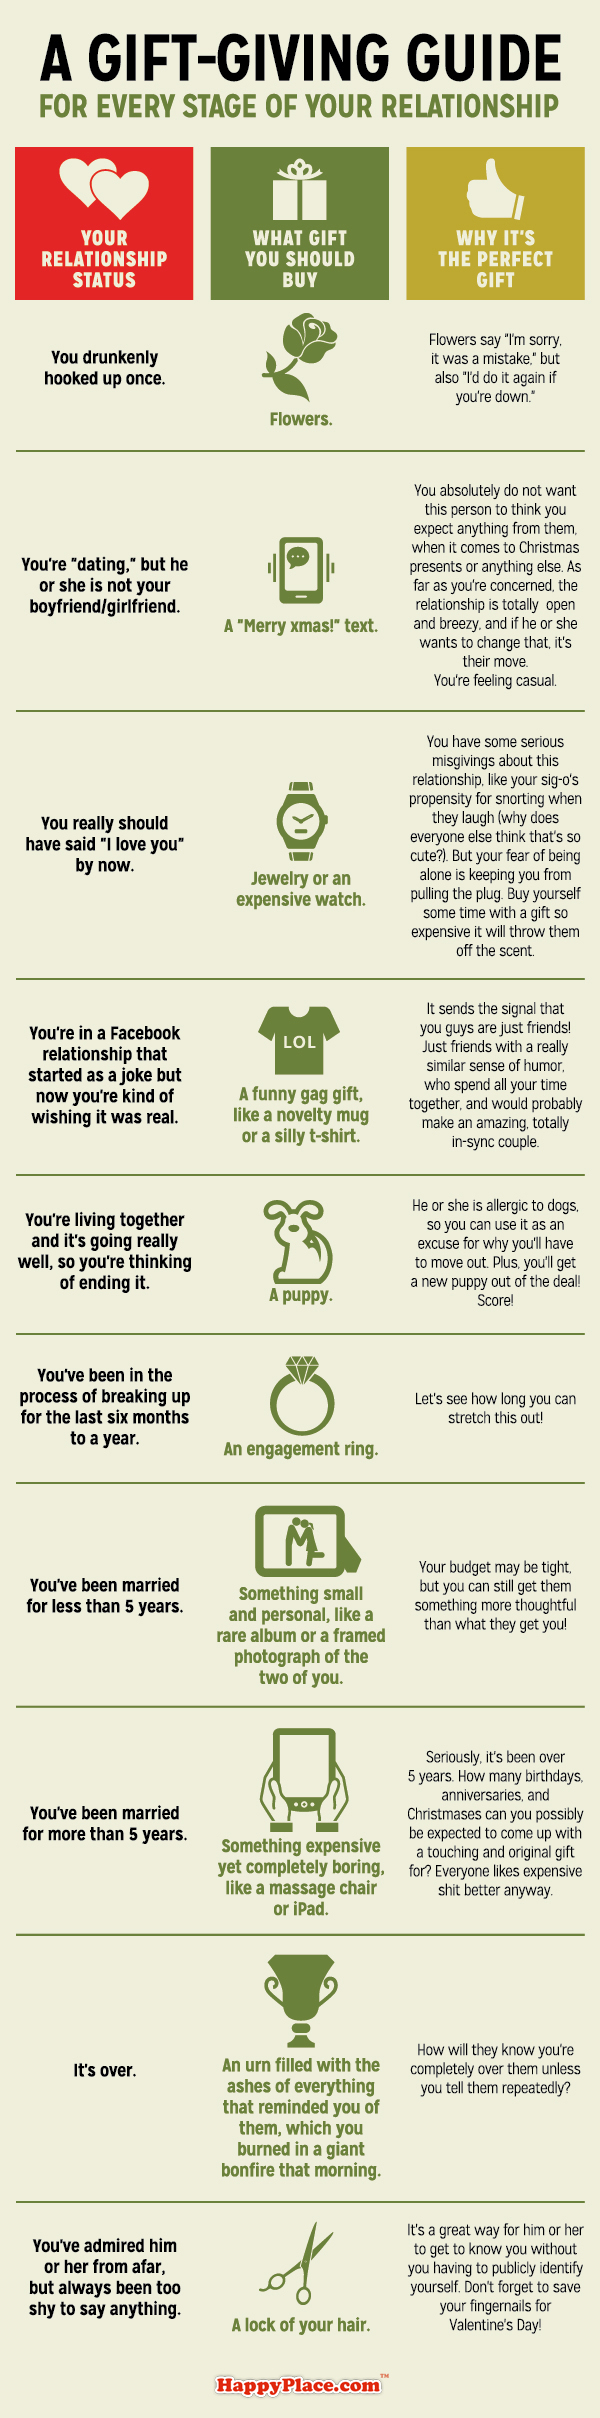 A gift giving guide for every stage of your relationship.